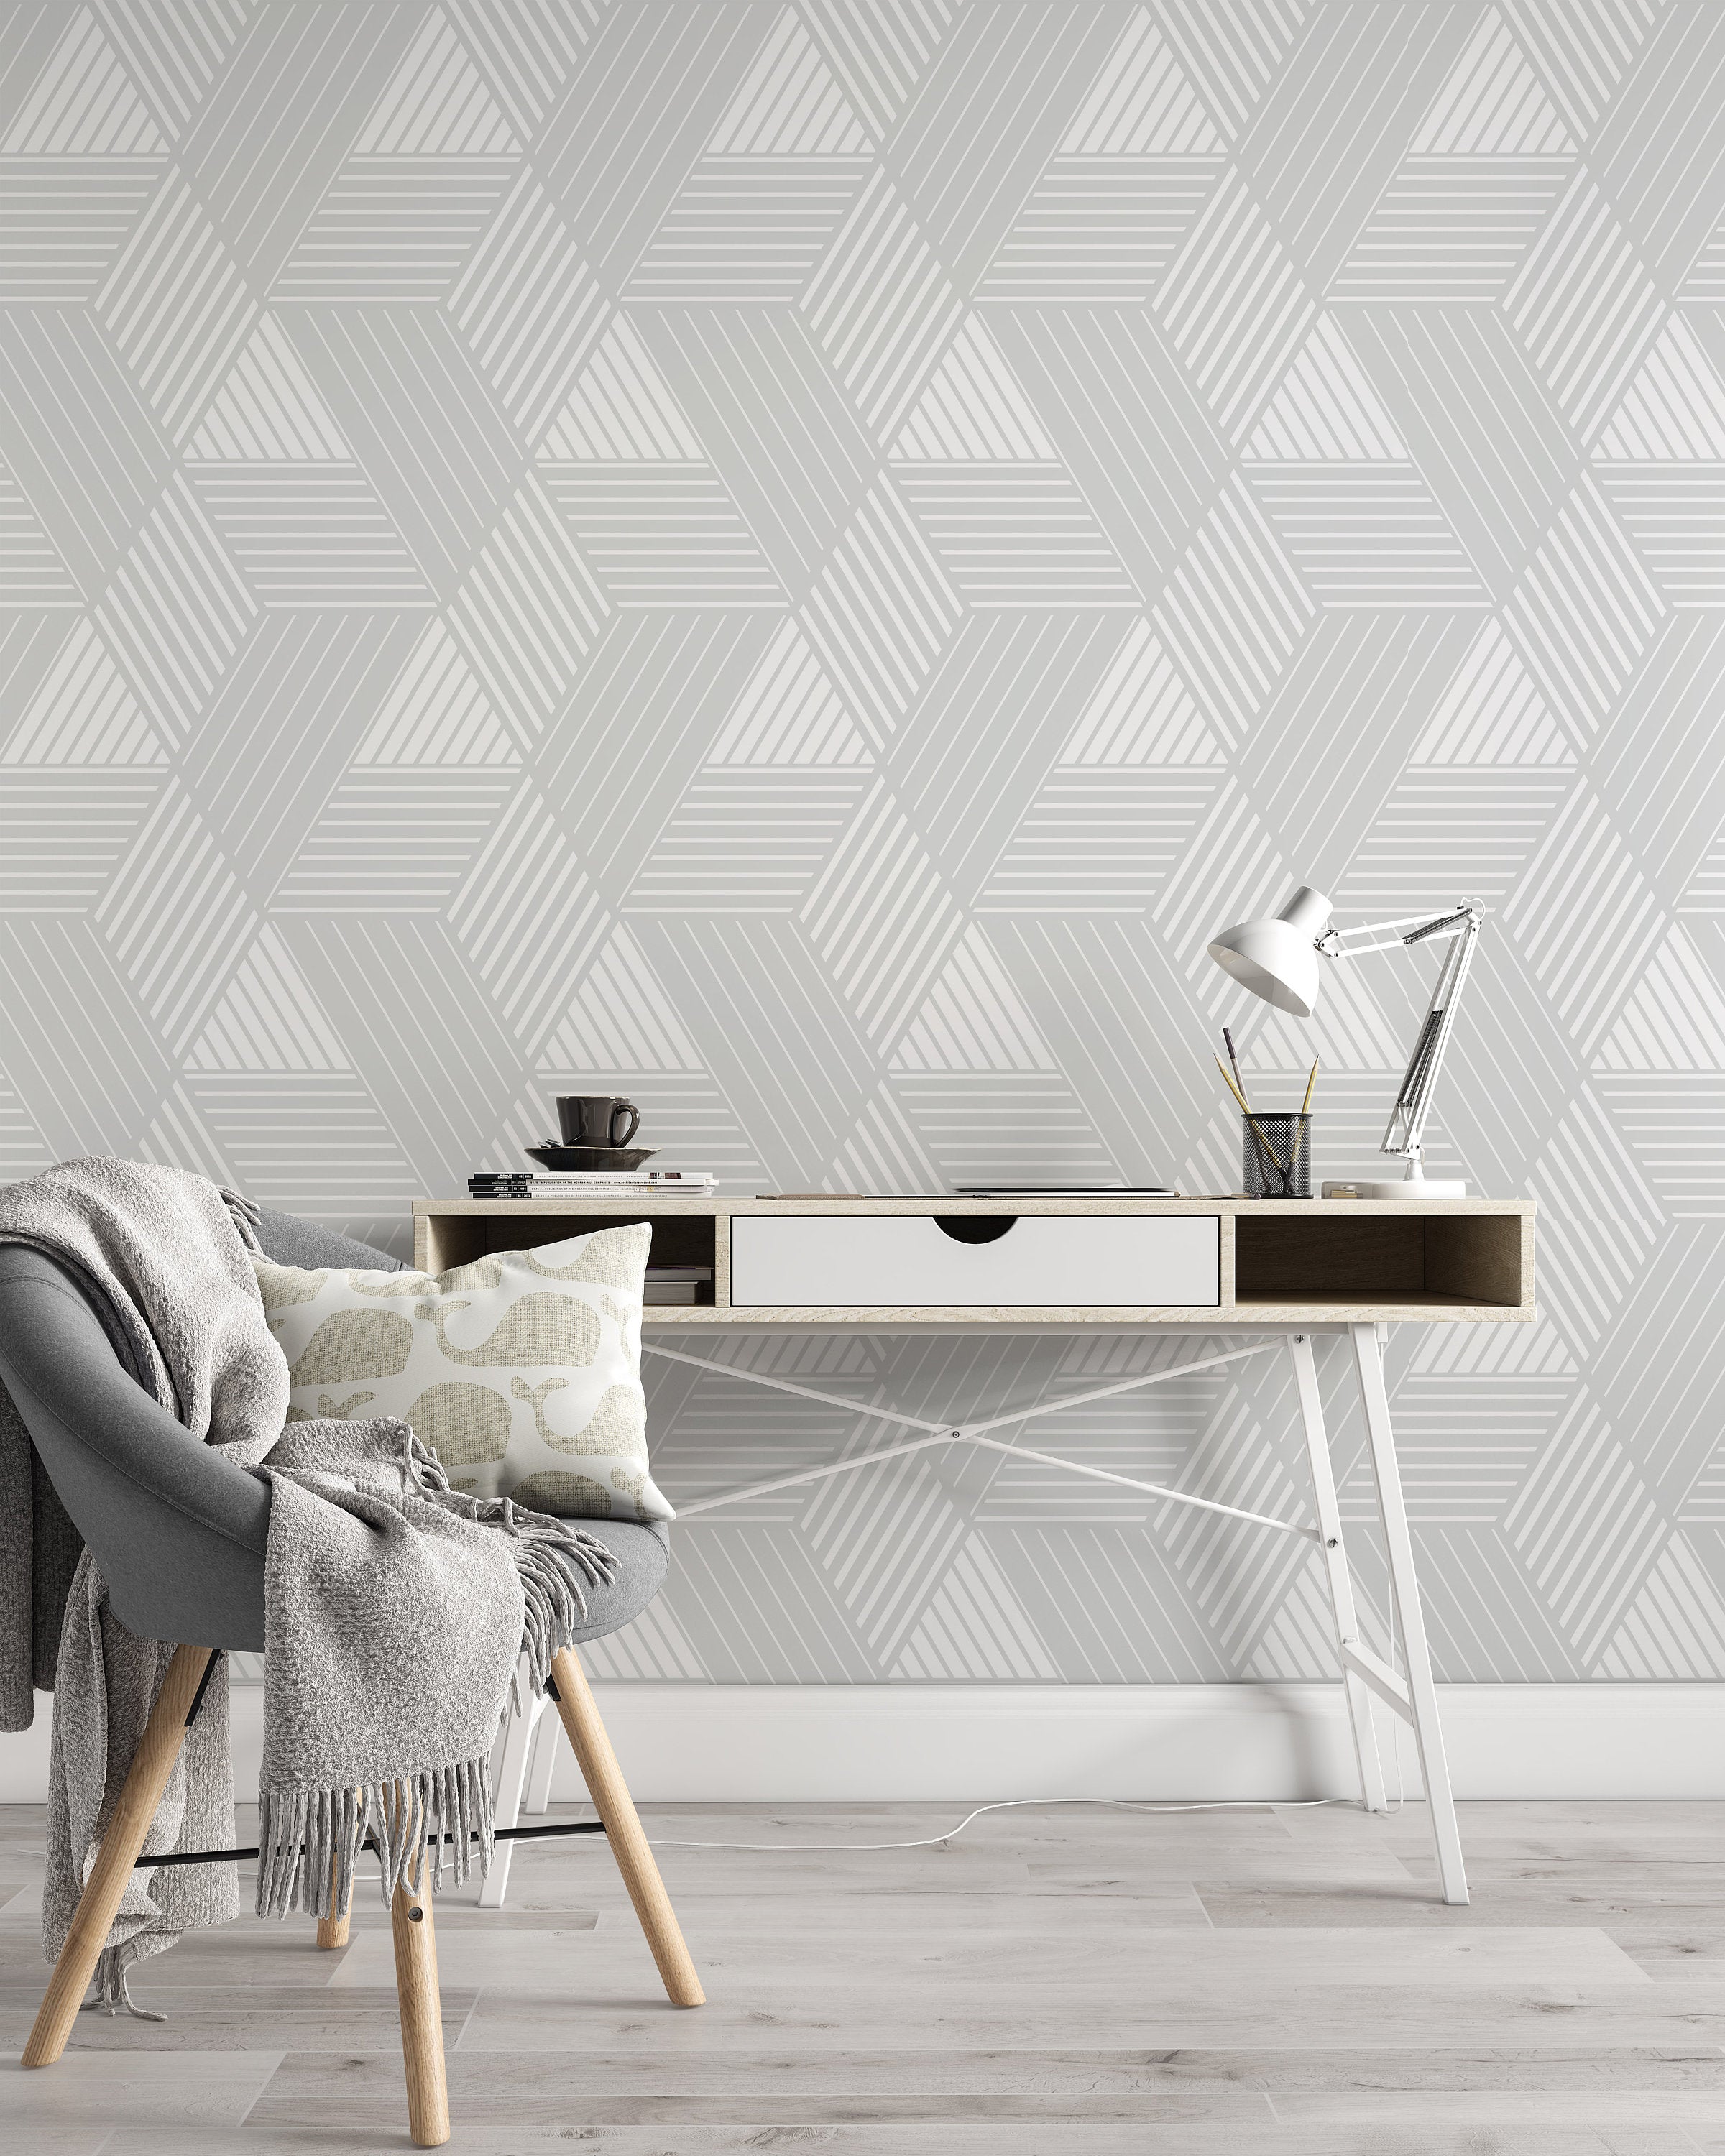 Abstract Geometric Pattern with Lines Gray White Texture Wallpaper Self Adhesive Peel and Stick Wall Sticker Wall Decoration Removable